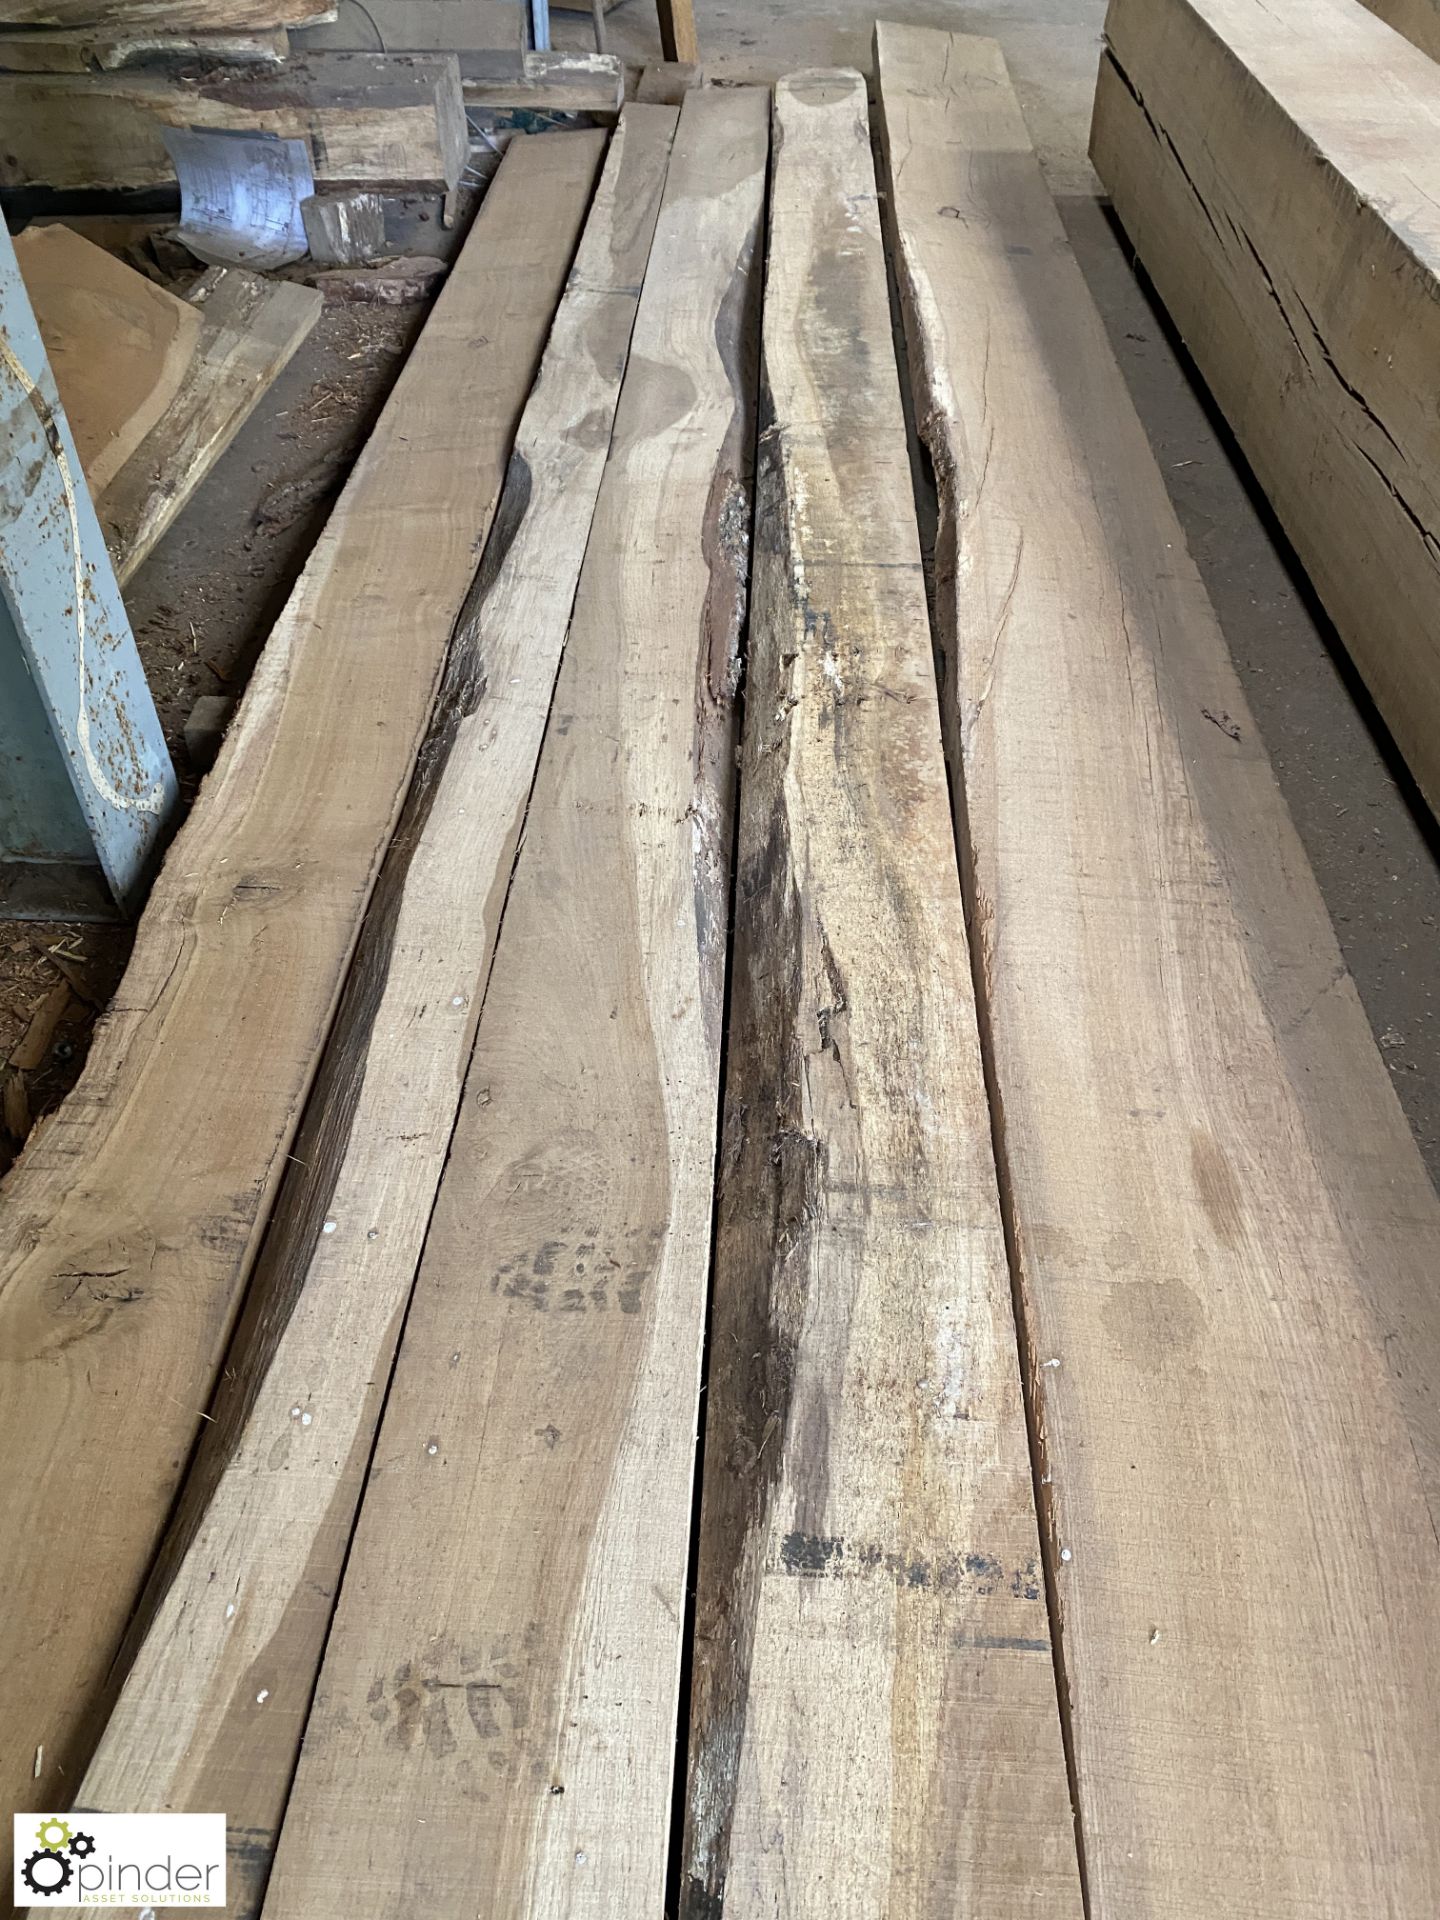 3 various air dried Oak Beams, 5100mm x 220mm x 100mm, 5100mm x 220mm x 75mm and 4500mm x 145mm x - Image 3 of 10